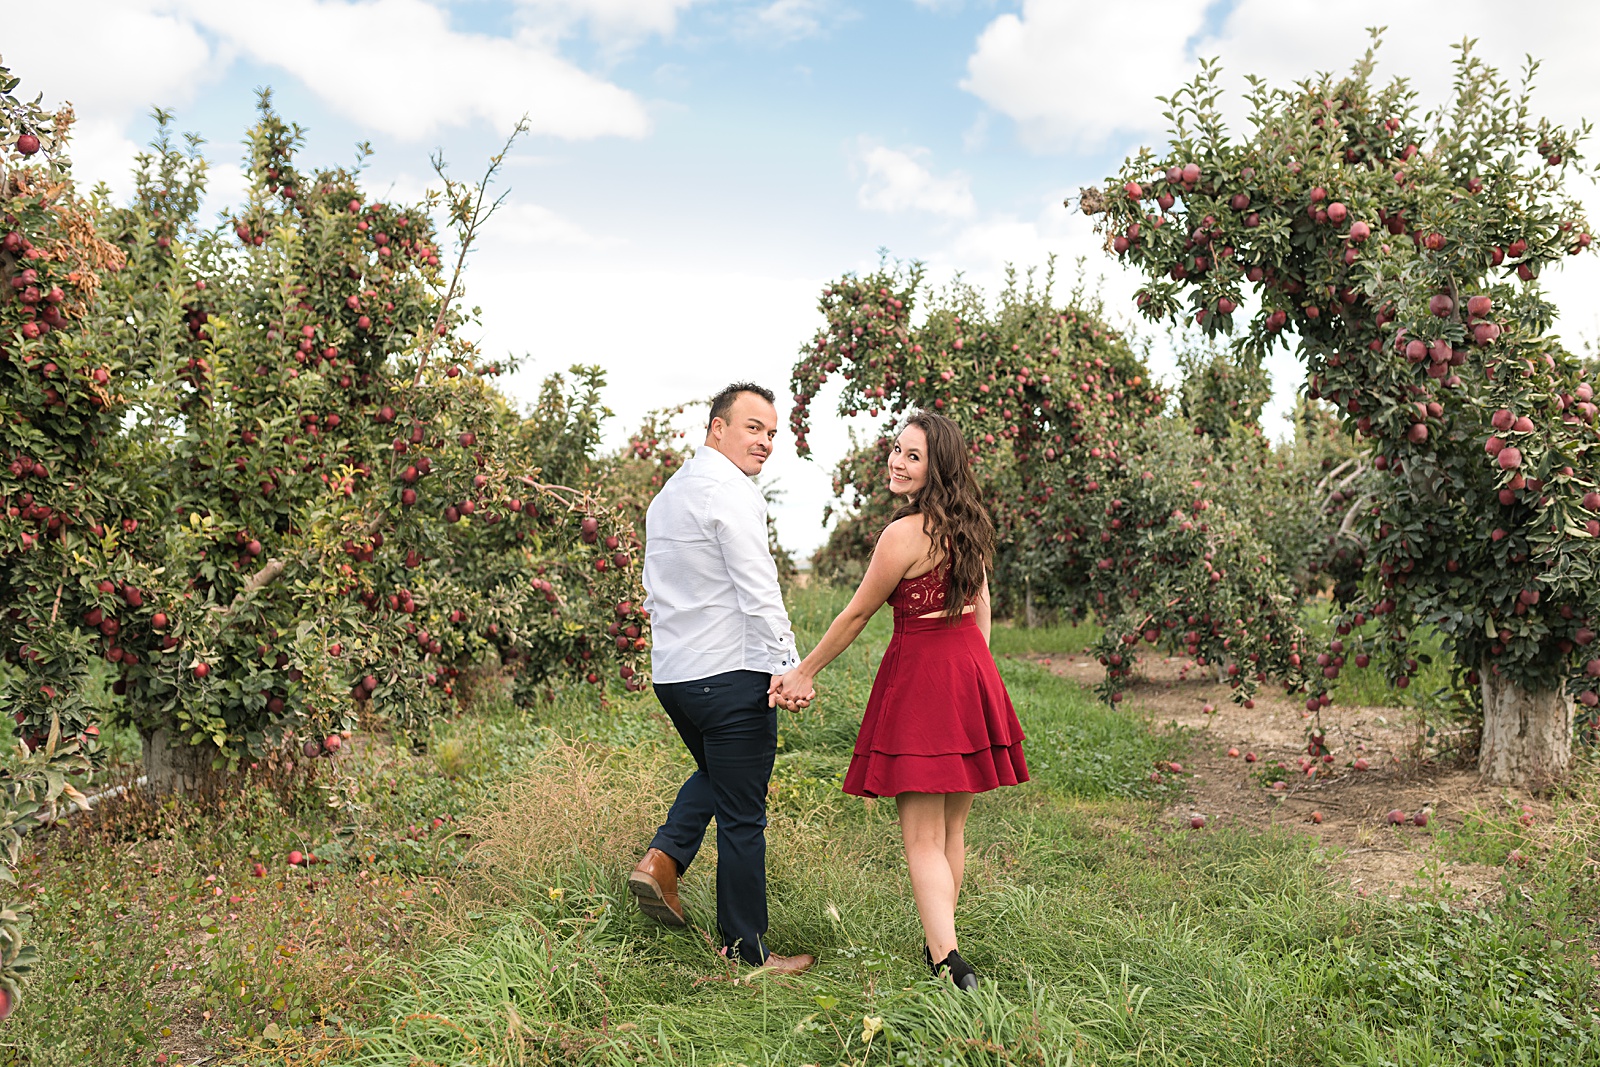  A Ste. Chapelle Winery Engagement Session-19.jpg